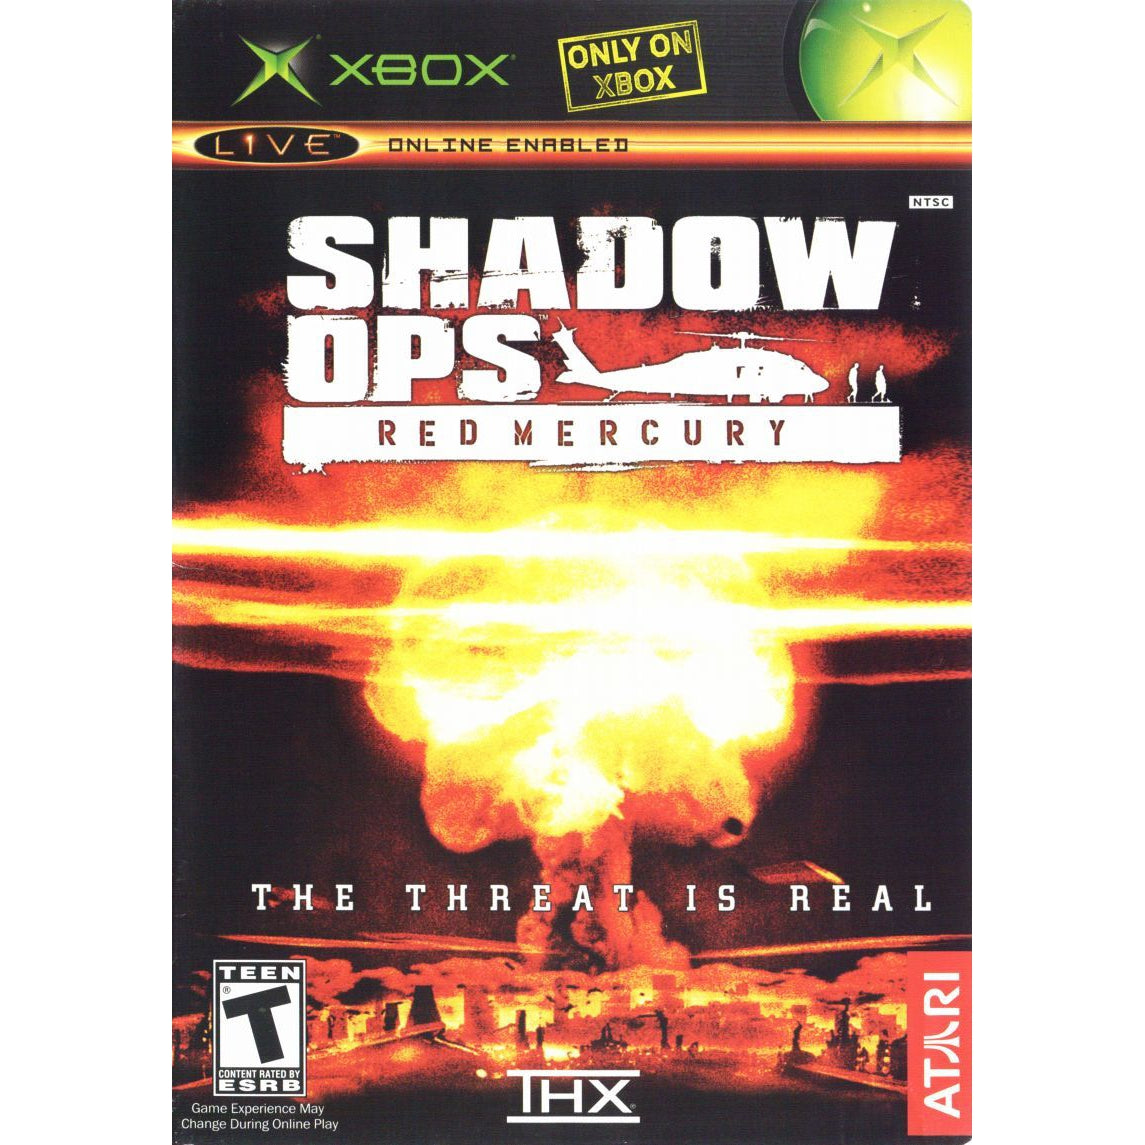 Shadow Ops: Red Mercury - Microsoft Xbox Game Complete - YourGamingShop.com - Buy, Sell, Trade Video Games Online. 120 Day Warranty. Satisfaction Guaranteed.